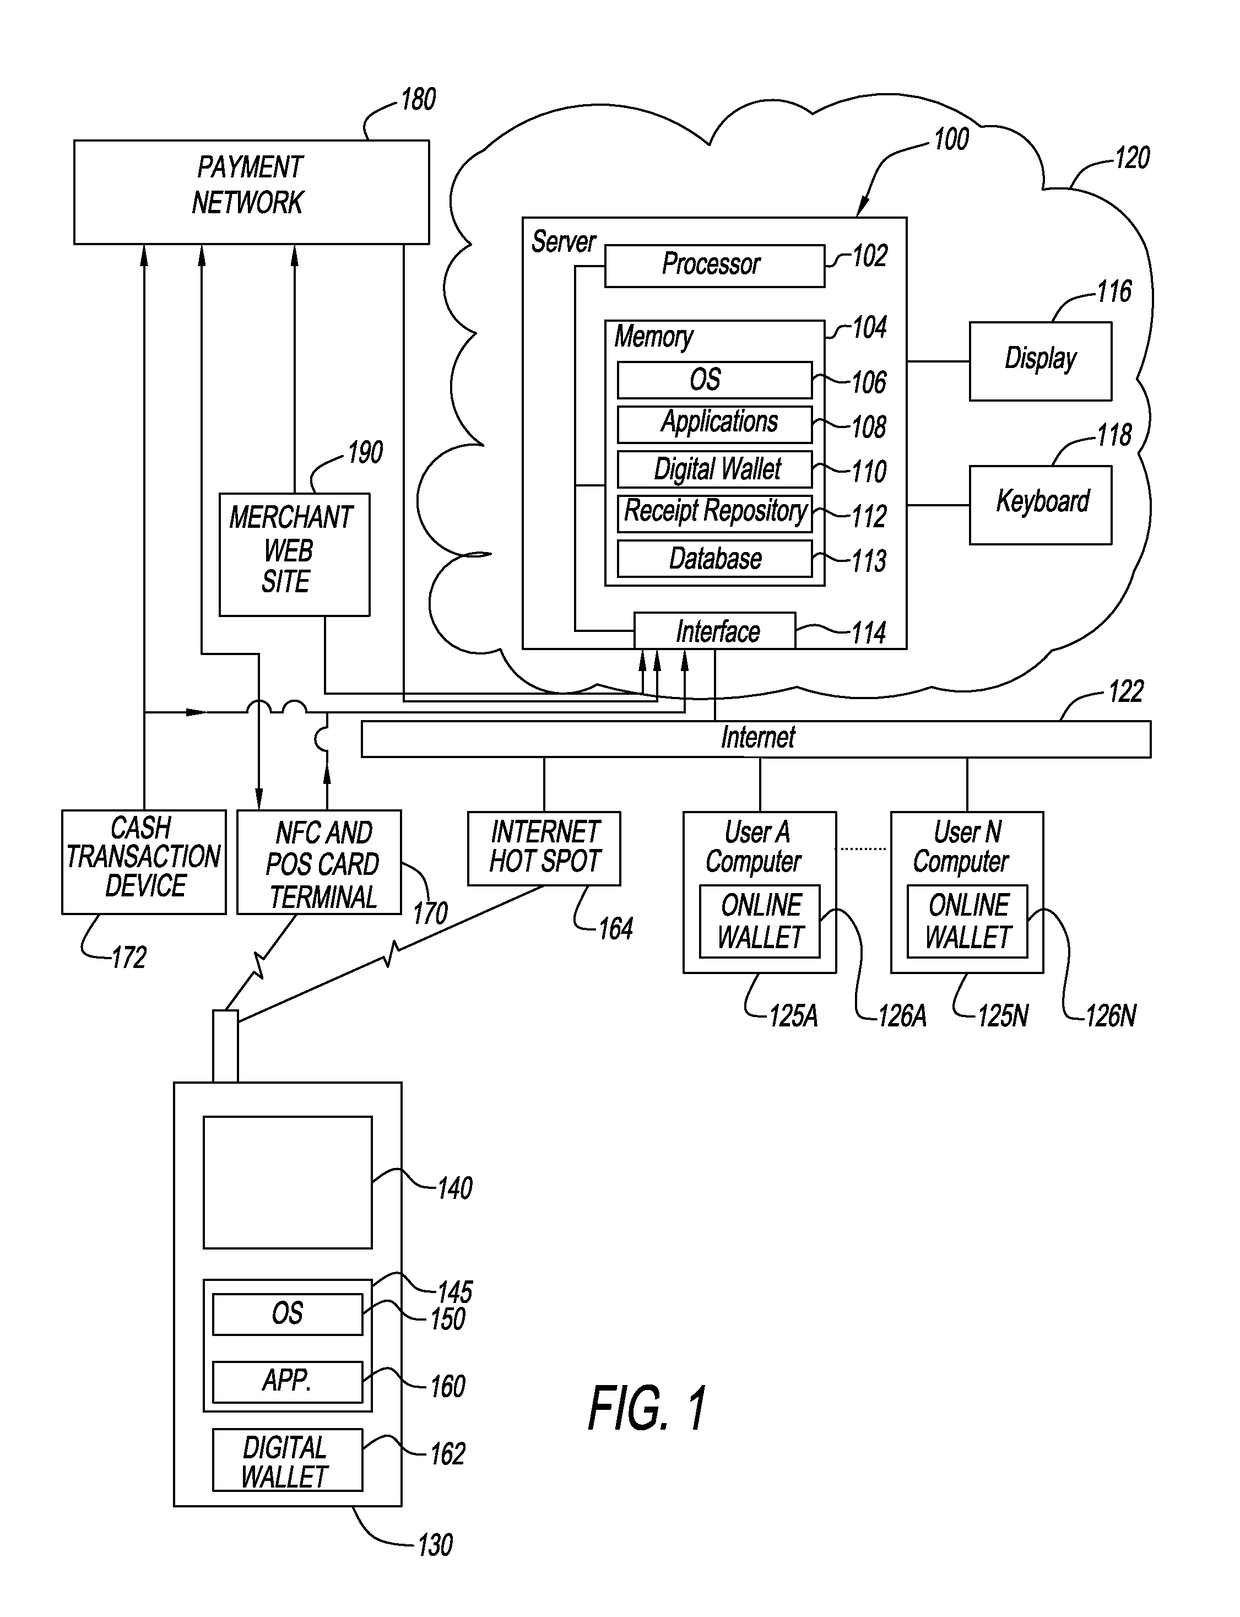 System and method for generating and storing digital receipts for electronic shopping